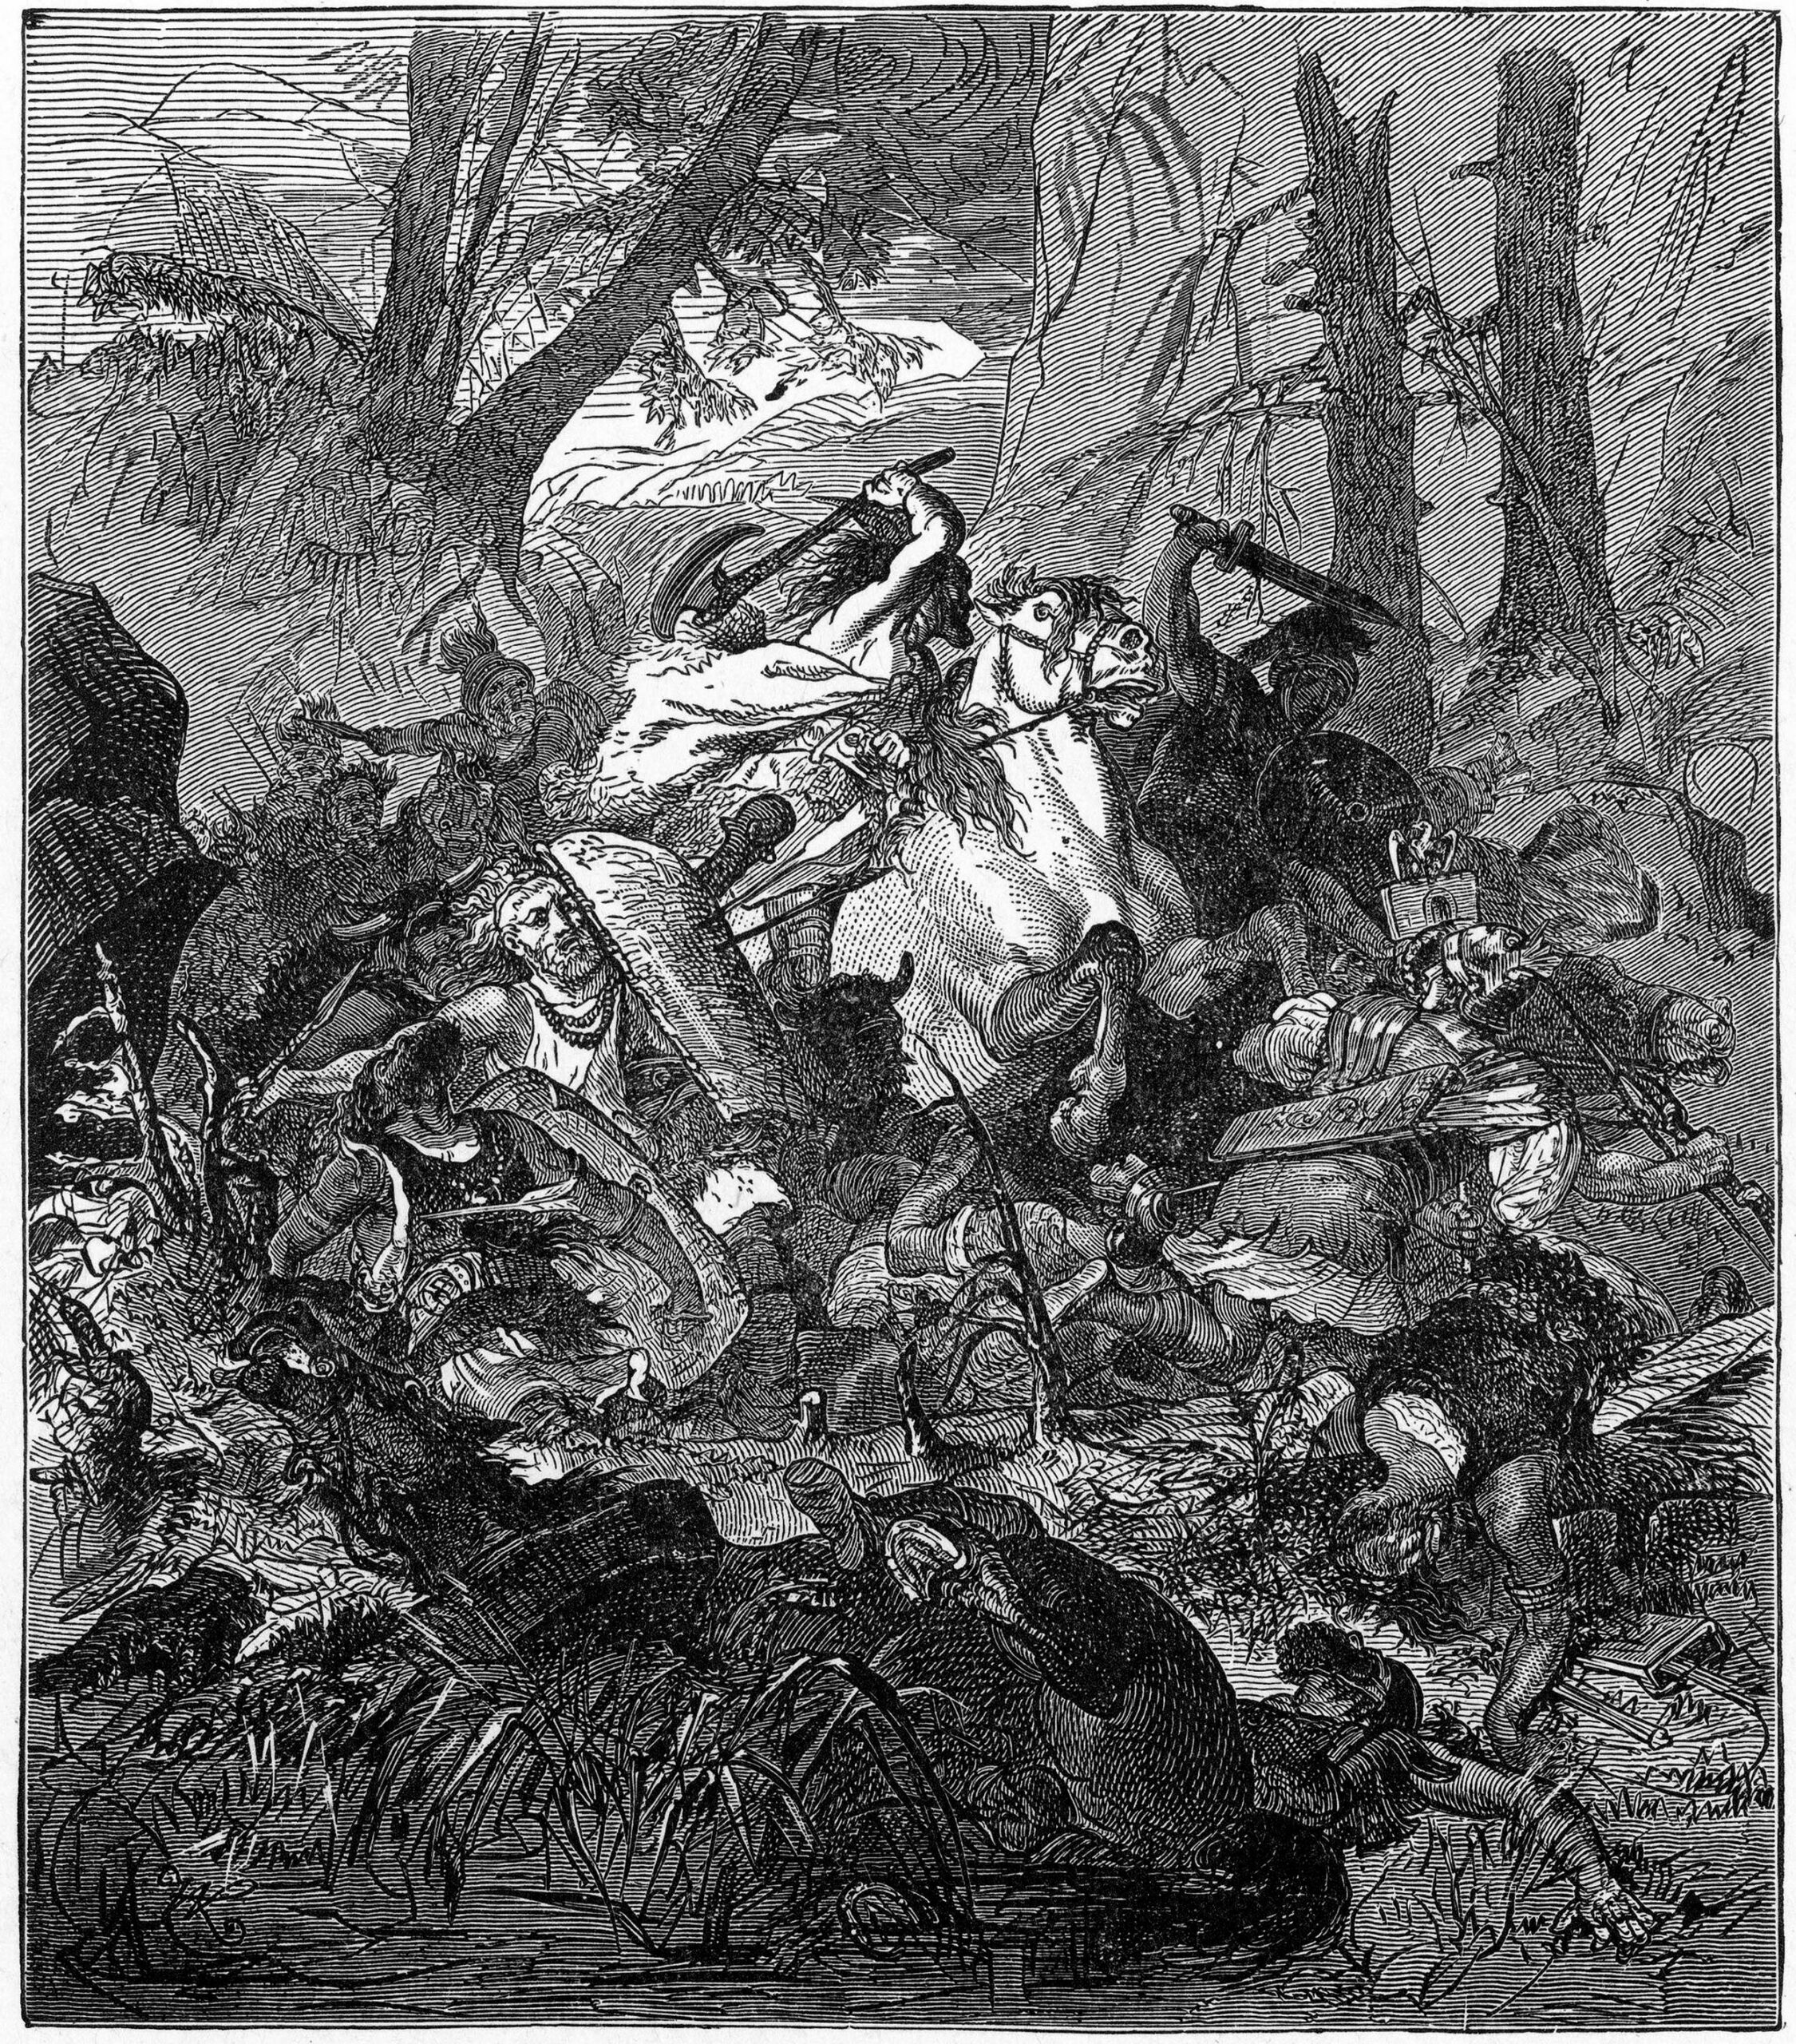 The Roman army led by Varsus met an ignominious fate at the hands of Arminius’s Goths in the Teutoburger Forest in ad 9.